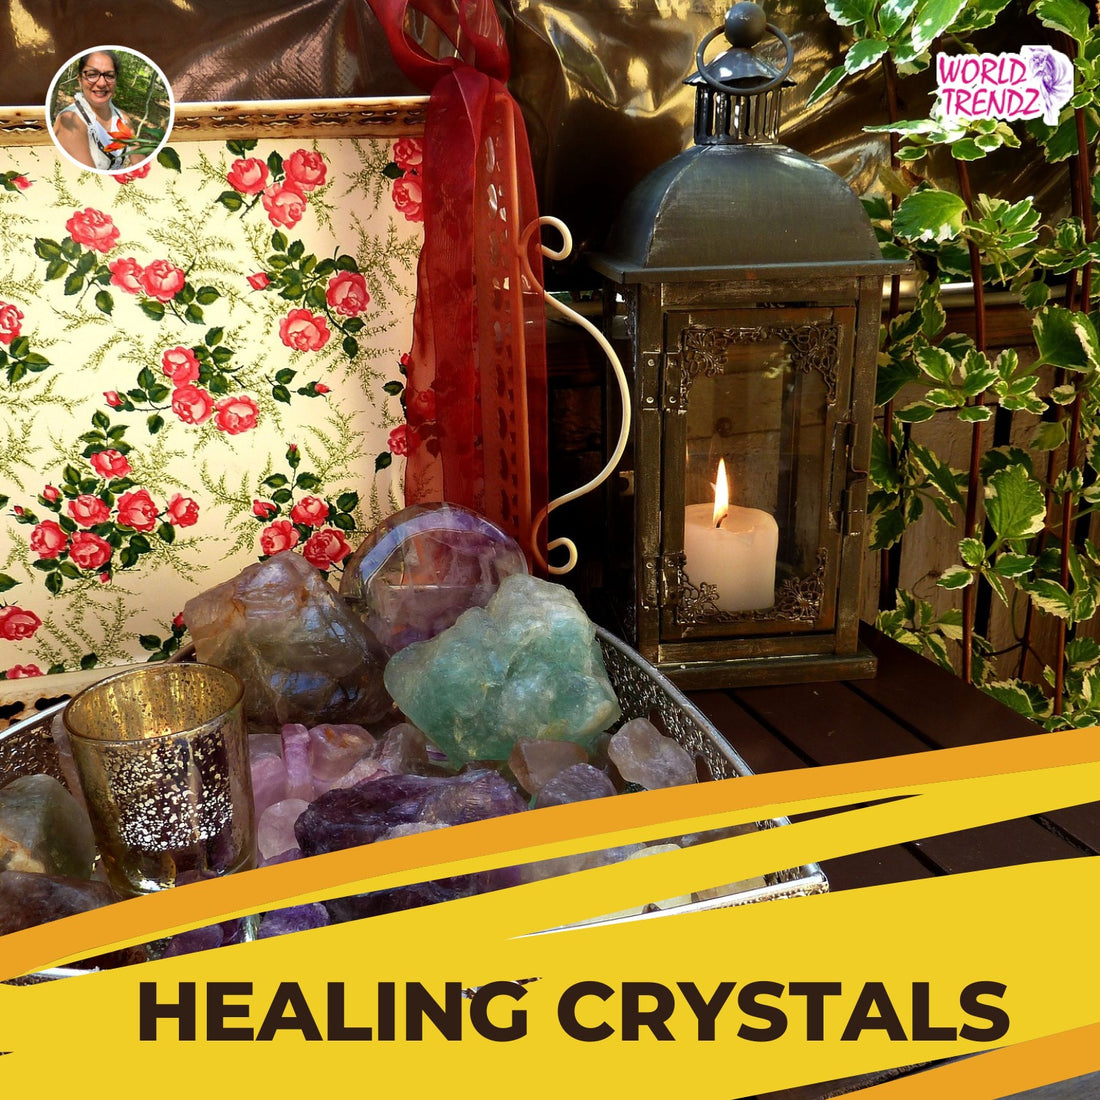 Go-To Resources About Healing Crystals